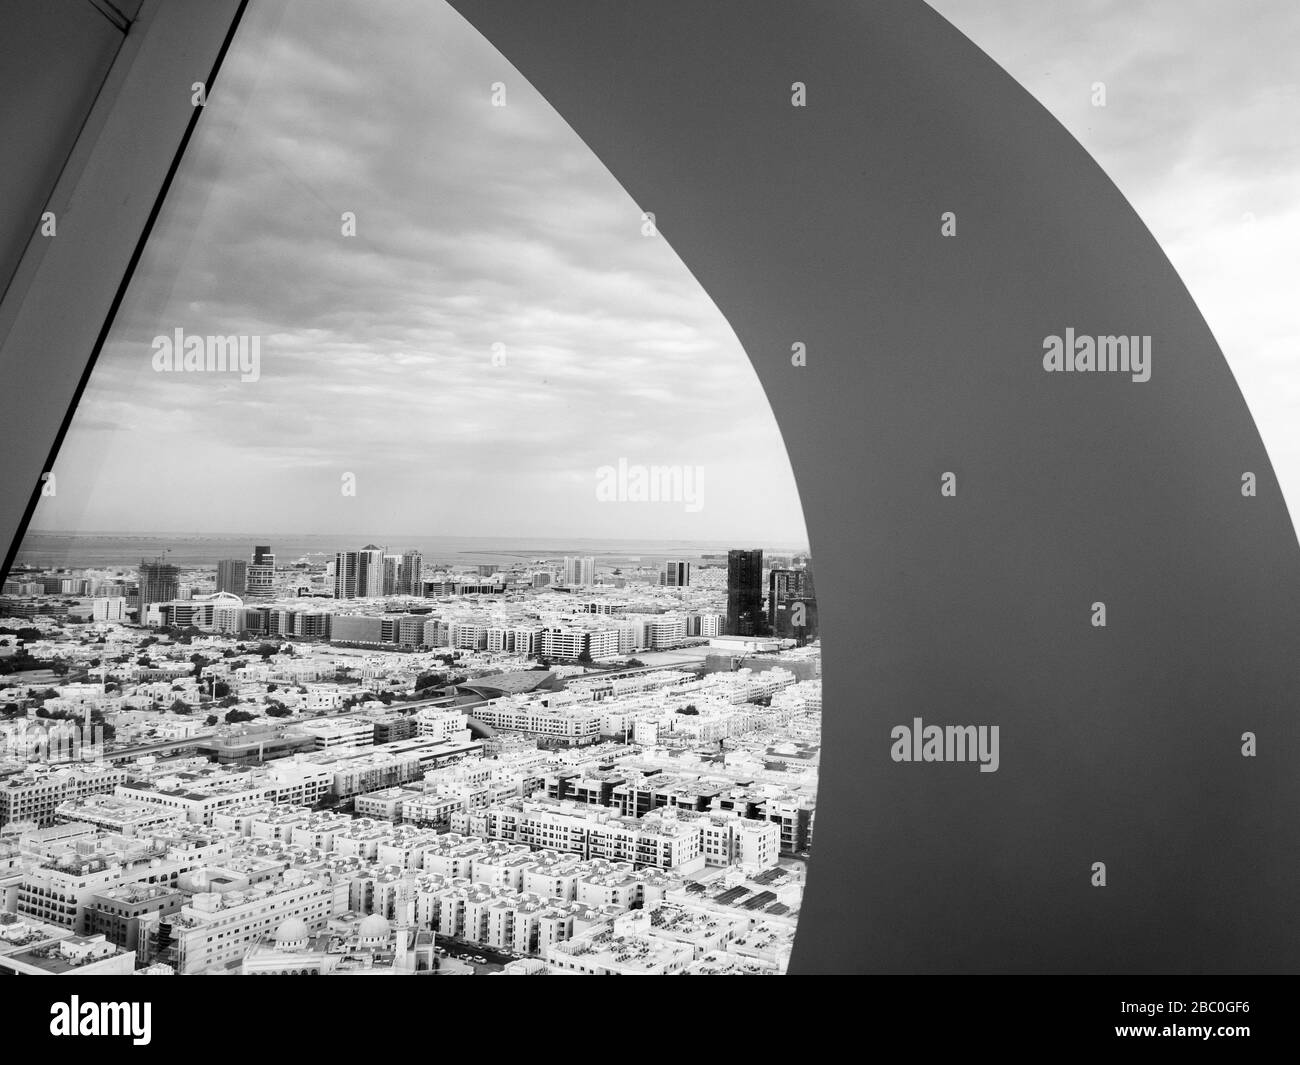 View over Dubai City from the top of the Dubai Frame, Dubai, United Arab Emirates, the largest picture frame on the planet. Stock Photo